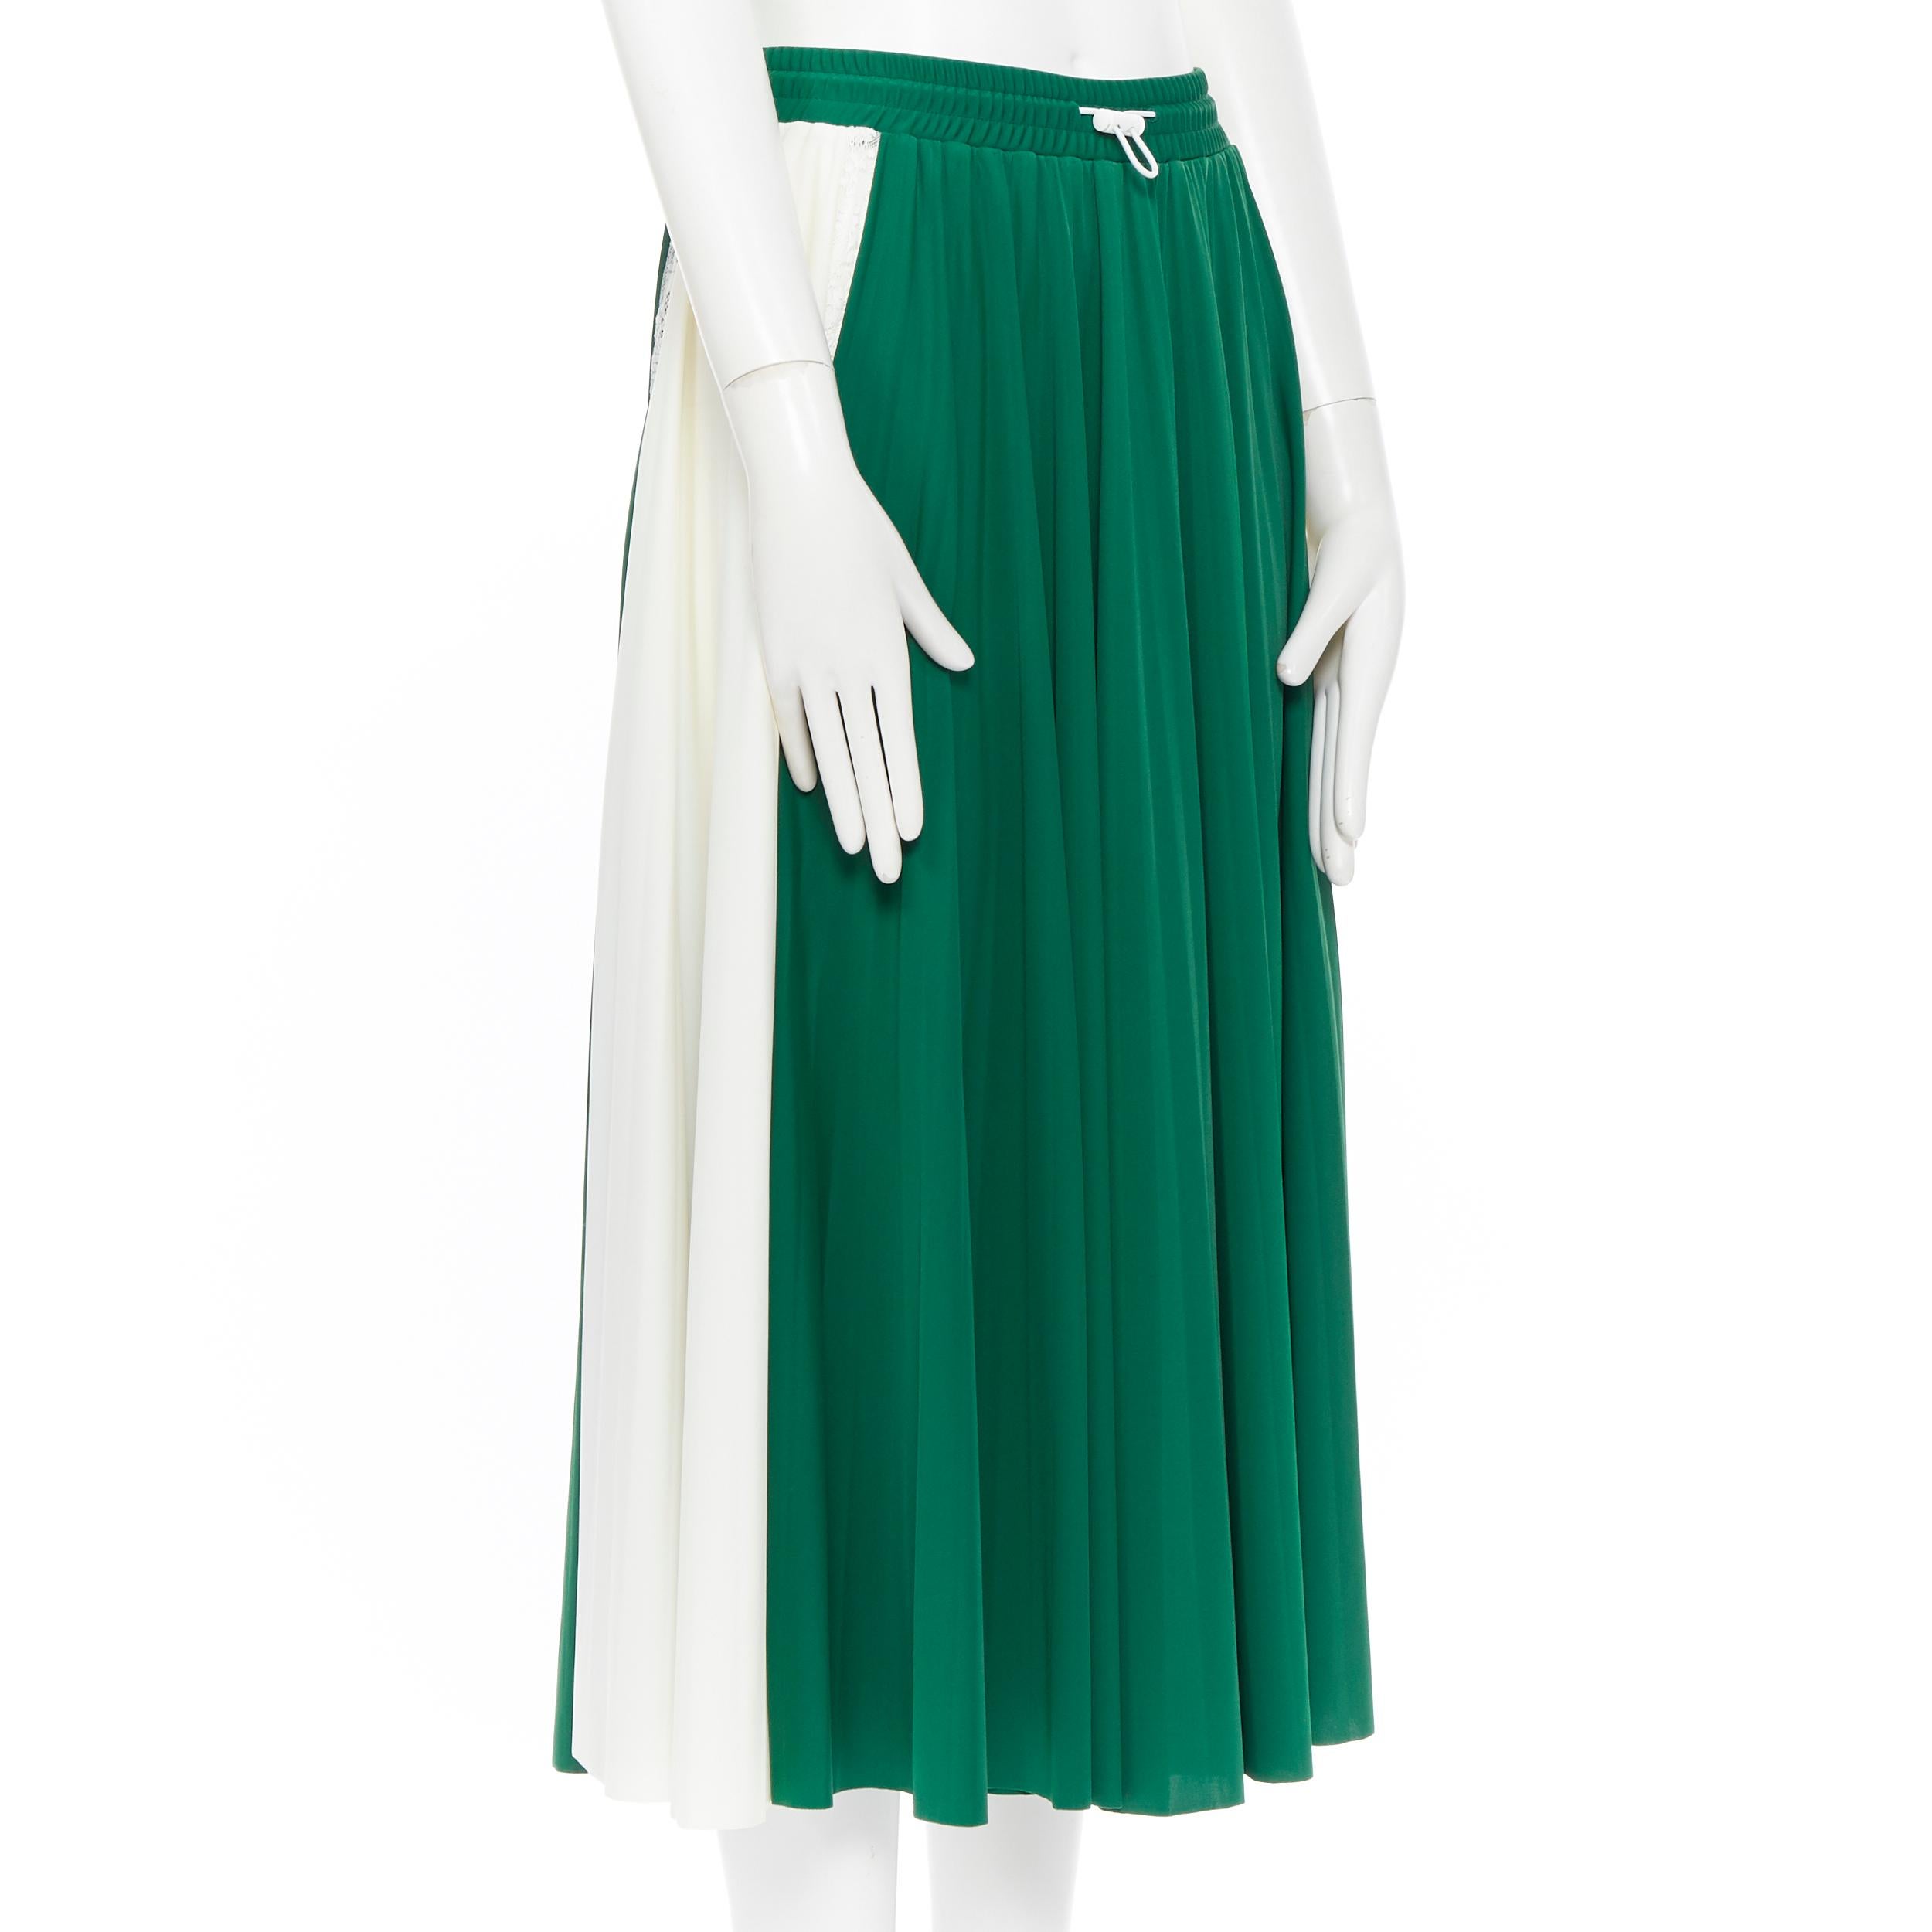 Blue runway VALENTINO 2018 green white colorblocked lace trimmed pleated skirt XS 24